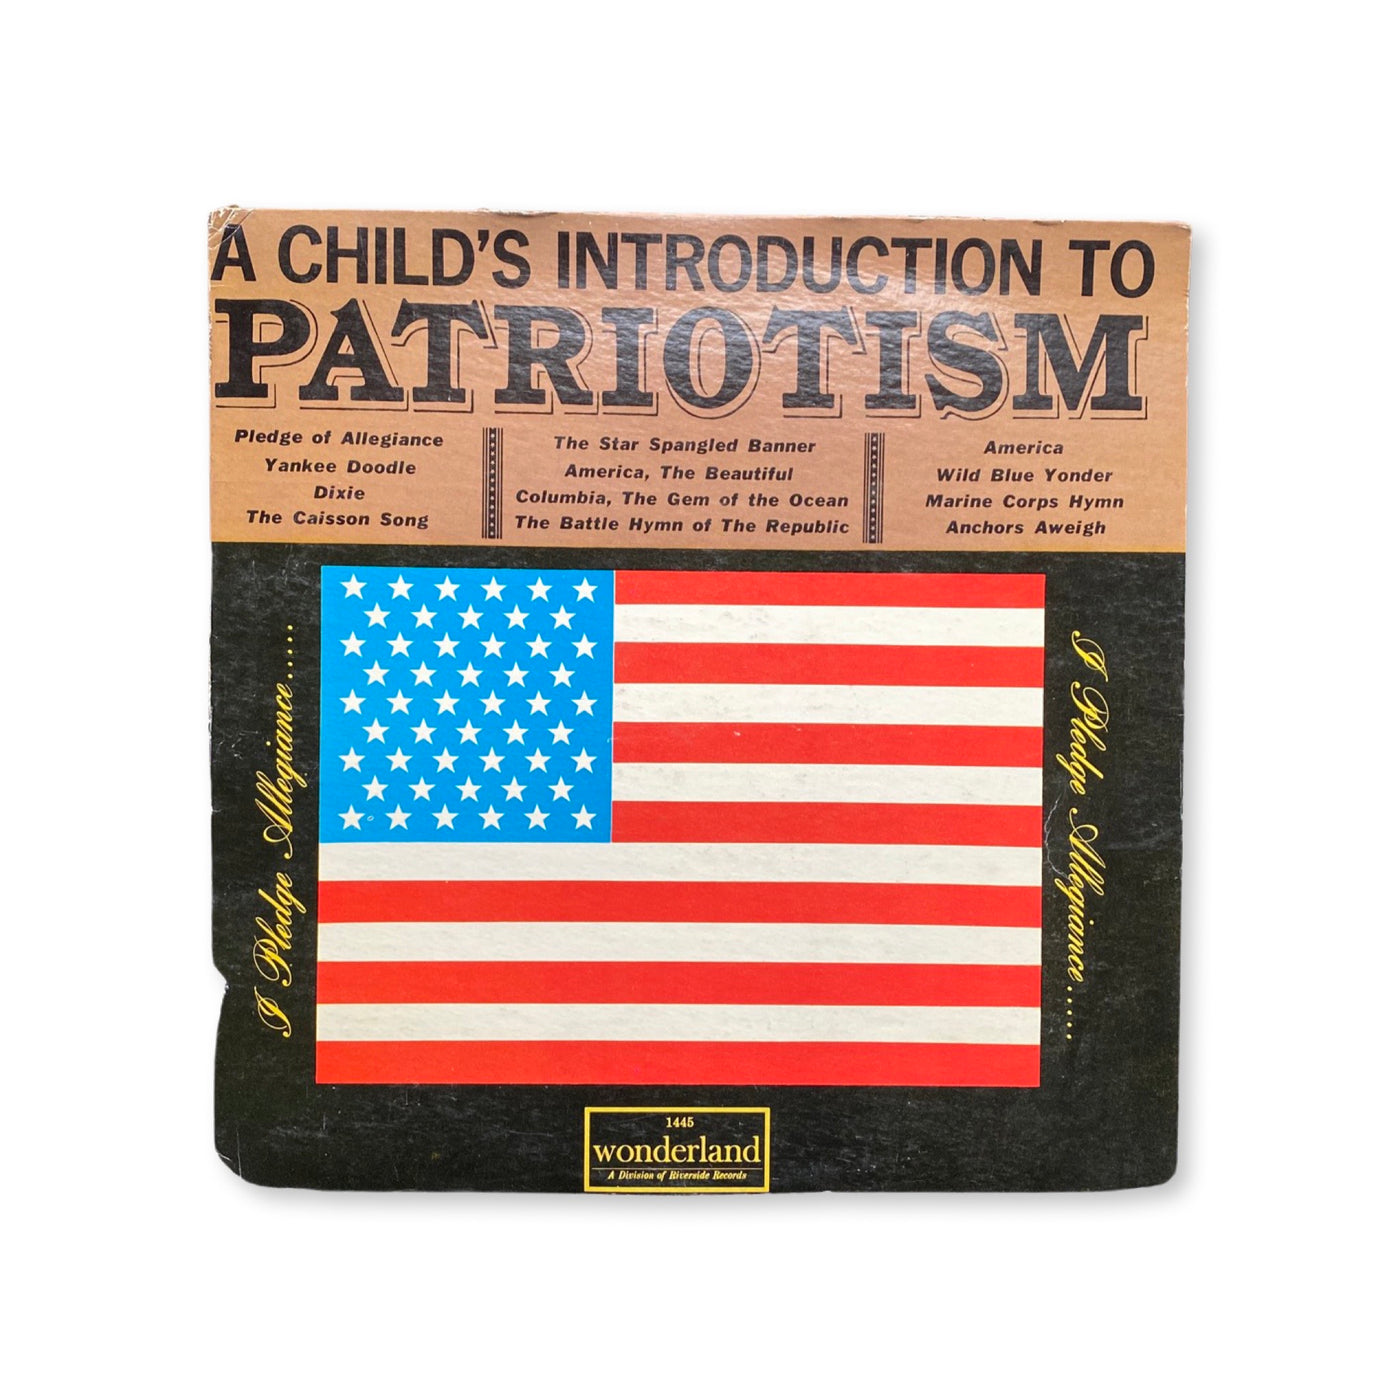 Mark Orton, The Collegiate Chorale - A Child's Introduction To Patriotism